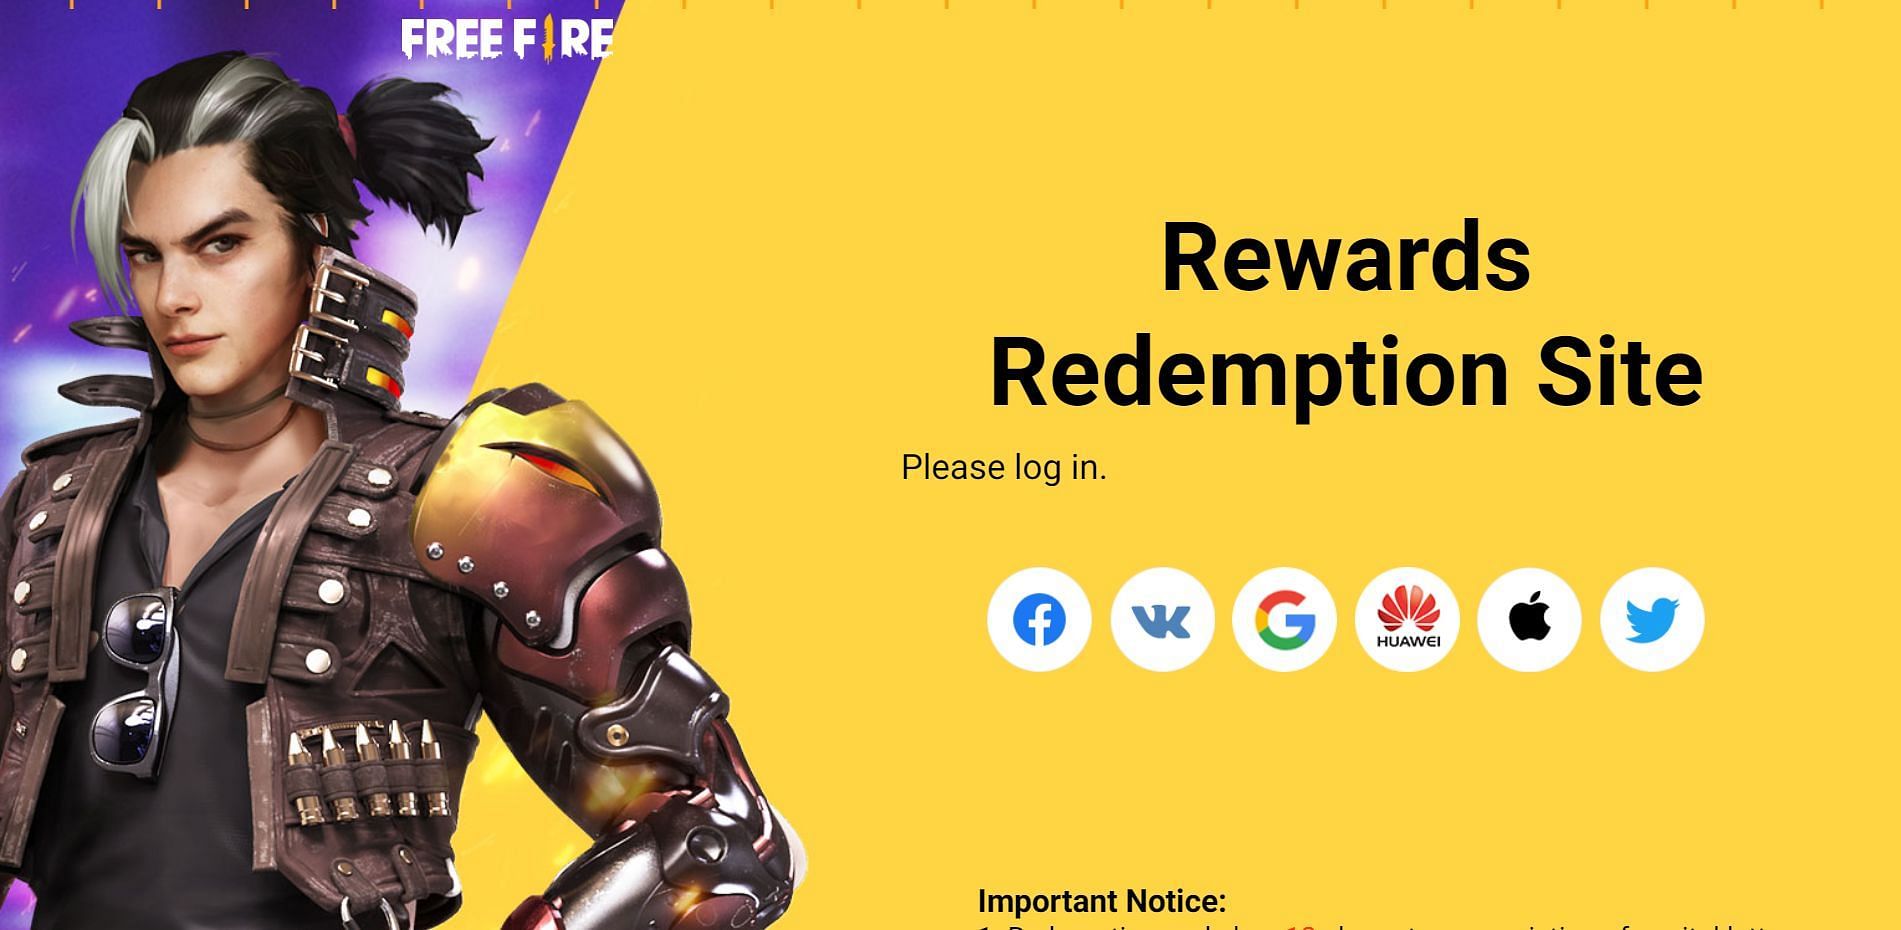 Users may use any of the log in options on the game&#039;s redemption site (Image via Garena)